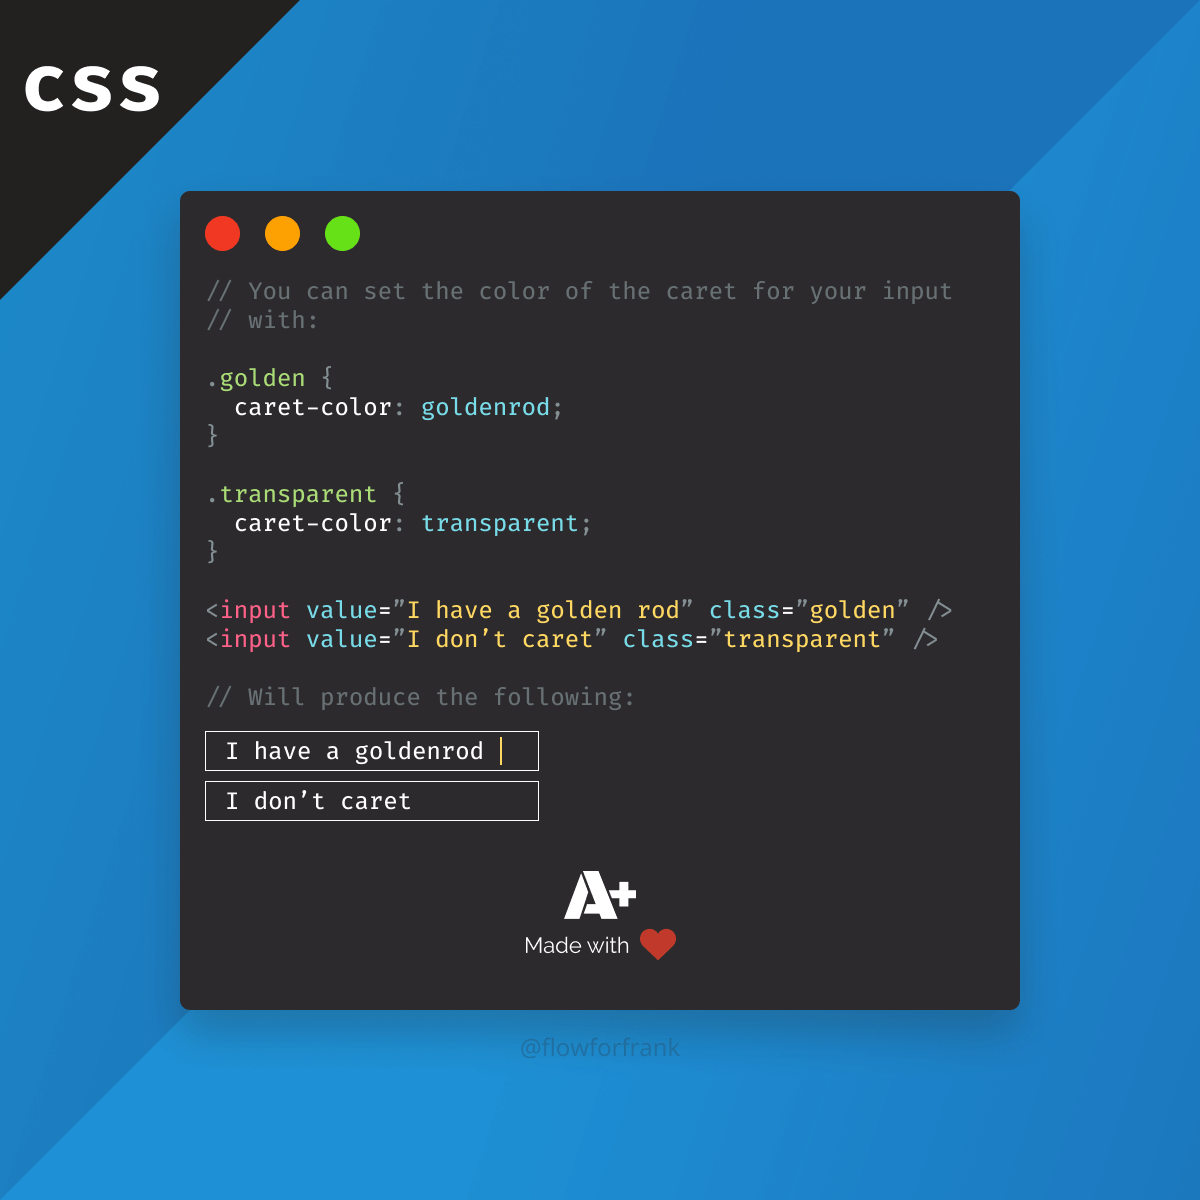 How to Change Caret Color in CSS